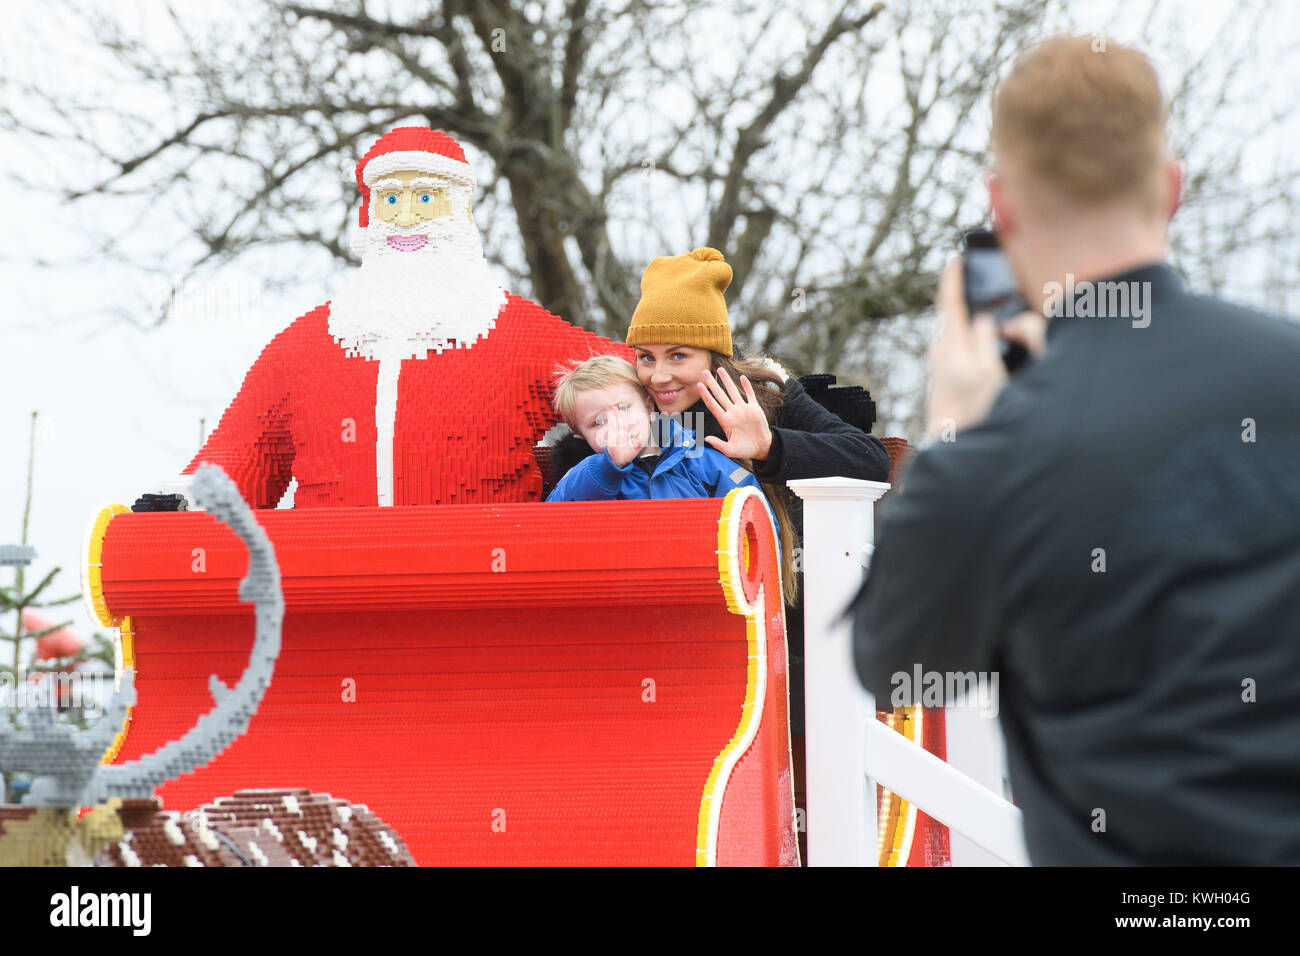 LEGOLAND at Christmas VIP event London  Featuring: Greg Rutherford and his partner Susie Verrill and their children Milo and Rex visit LEGOLANDs Christmas event at the LEGOLAND® Windsor Resort Where: London, United Kingdom When: 03 Dec 2017 Credit: WENN.com Stock Photo